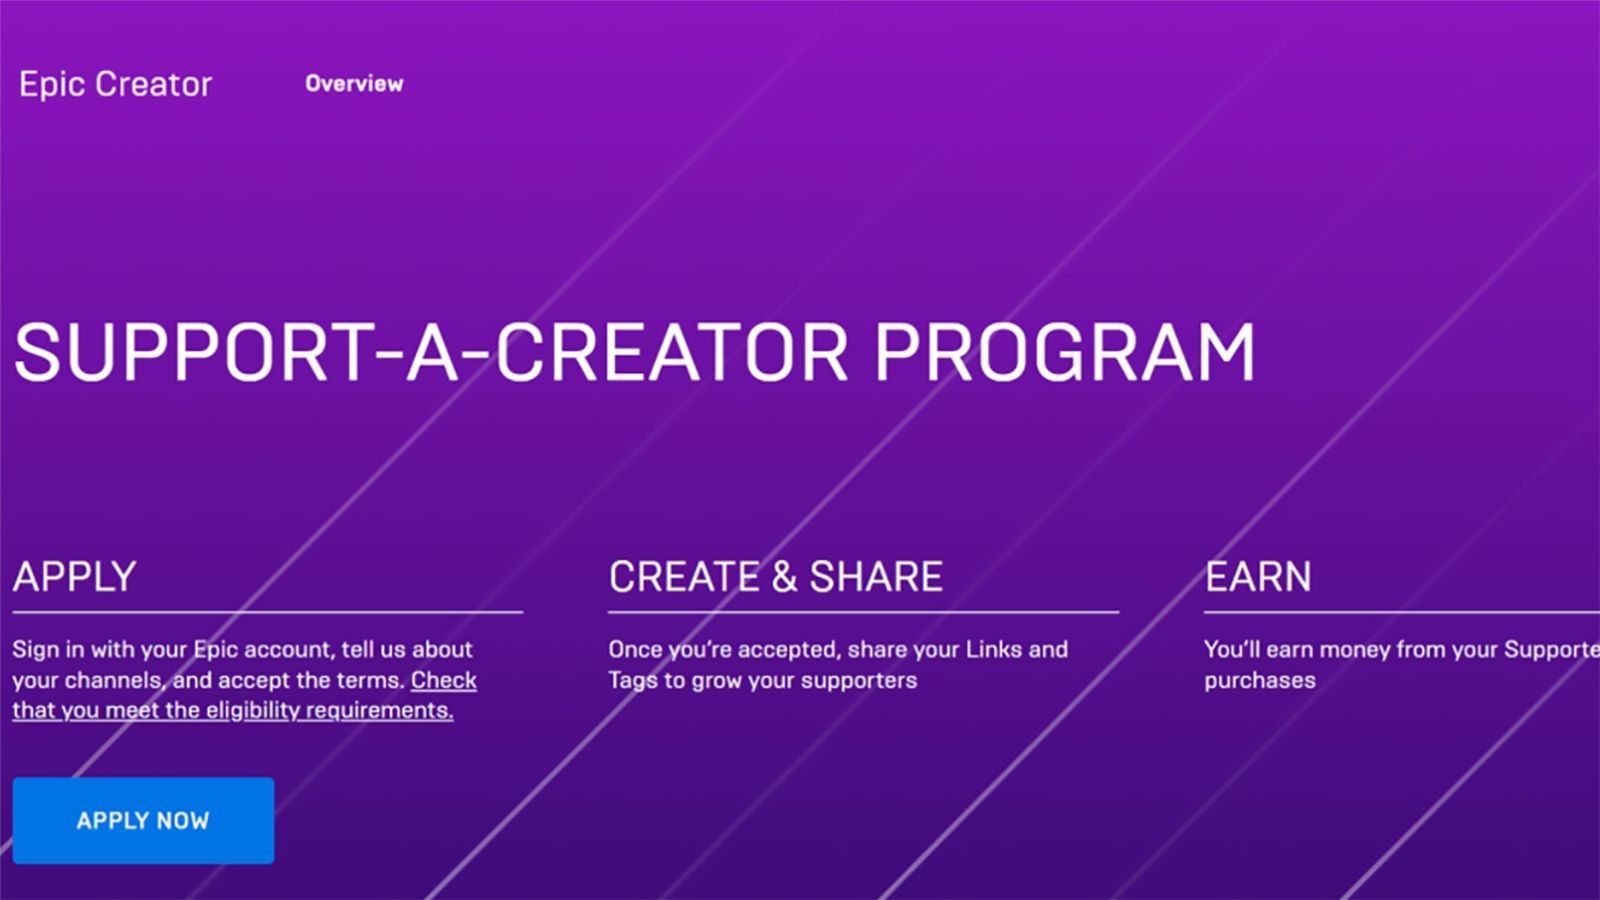 The Support-A-Creator program is a great way to monetize Fortnite (Image via Epic Games)